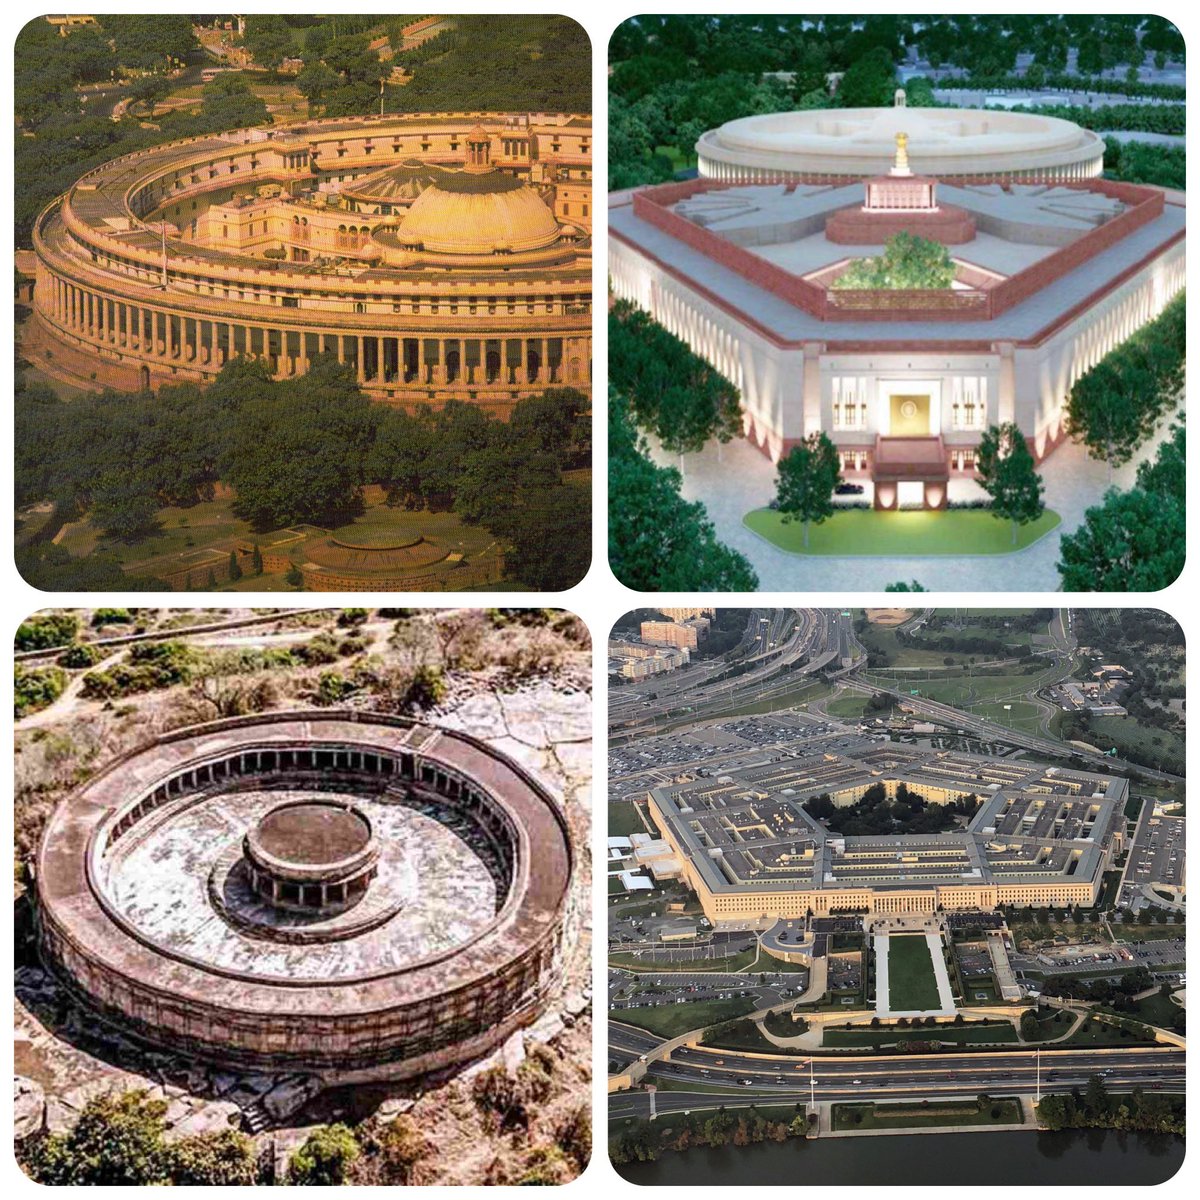 Well, the existing Parliament building built by the Brits bears a remarkable similarity to the Chausath Yogini Temple in Morena in Madhya Pradesh, while the new ‘atmanirbhar’ Parliament building bears an eerie likeness to the Pentagon in Washington DC.